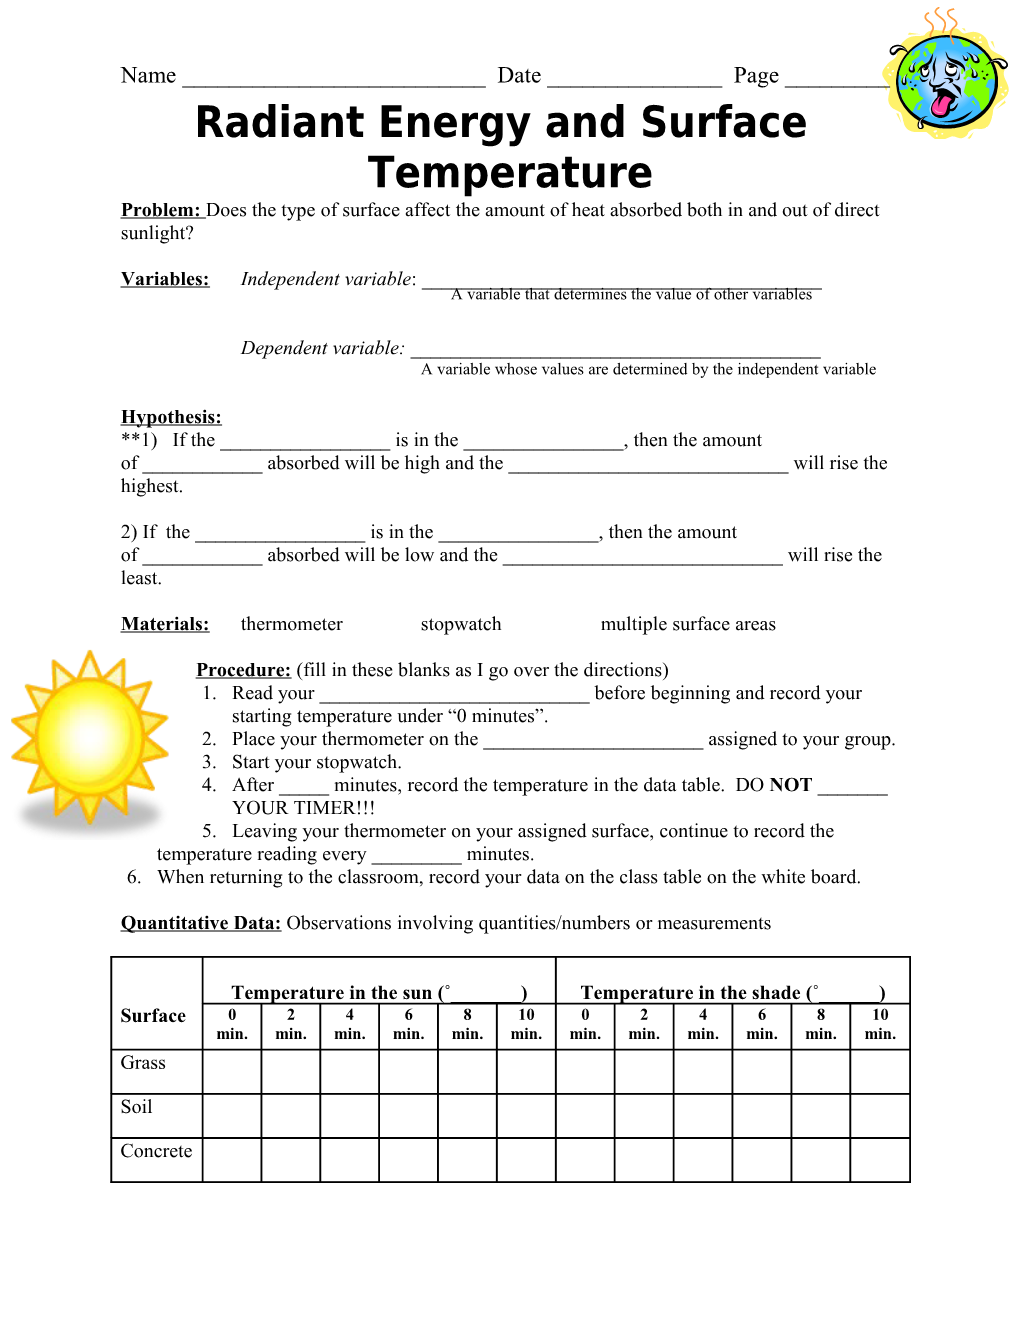 Radiant Energy and Surface Temperature